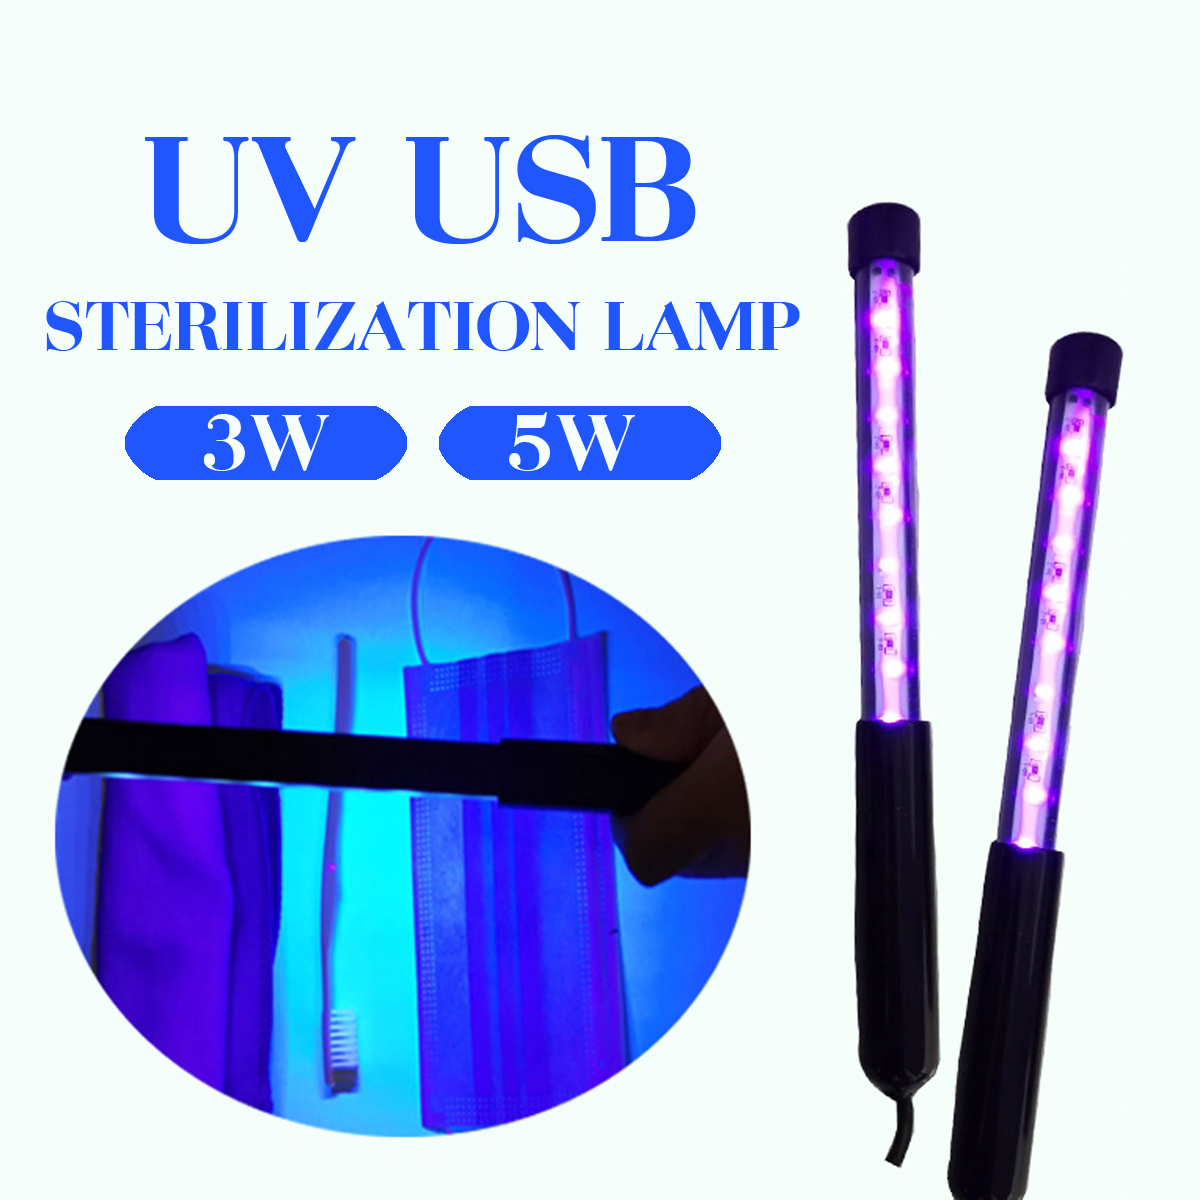 Mobile-UV-Disinfection-Lamp-USB-Charging-Portable-Disinfection-Stick-Uv-Mask-Germicidal-Lamp-Rod-Ste-1689247-1